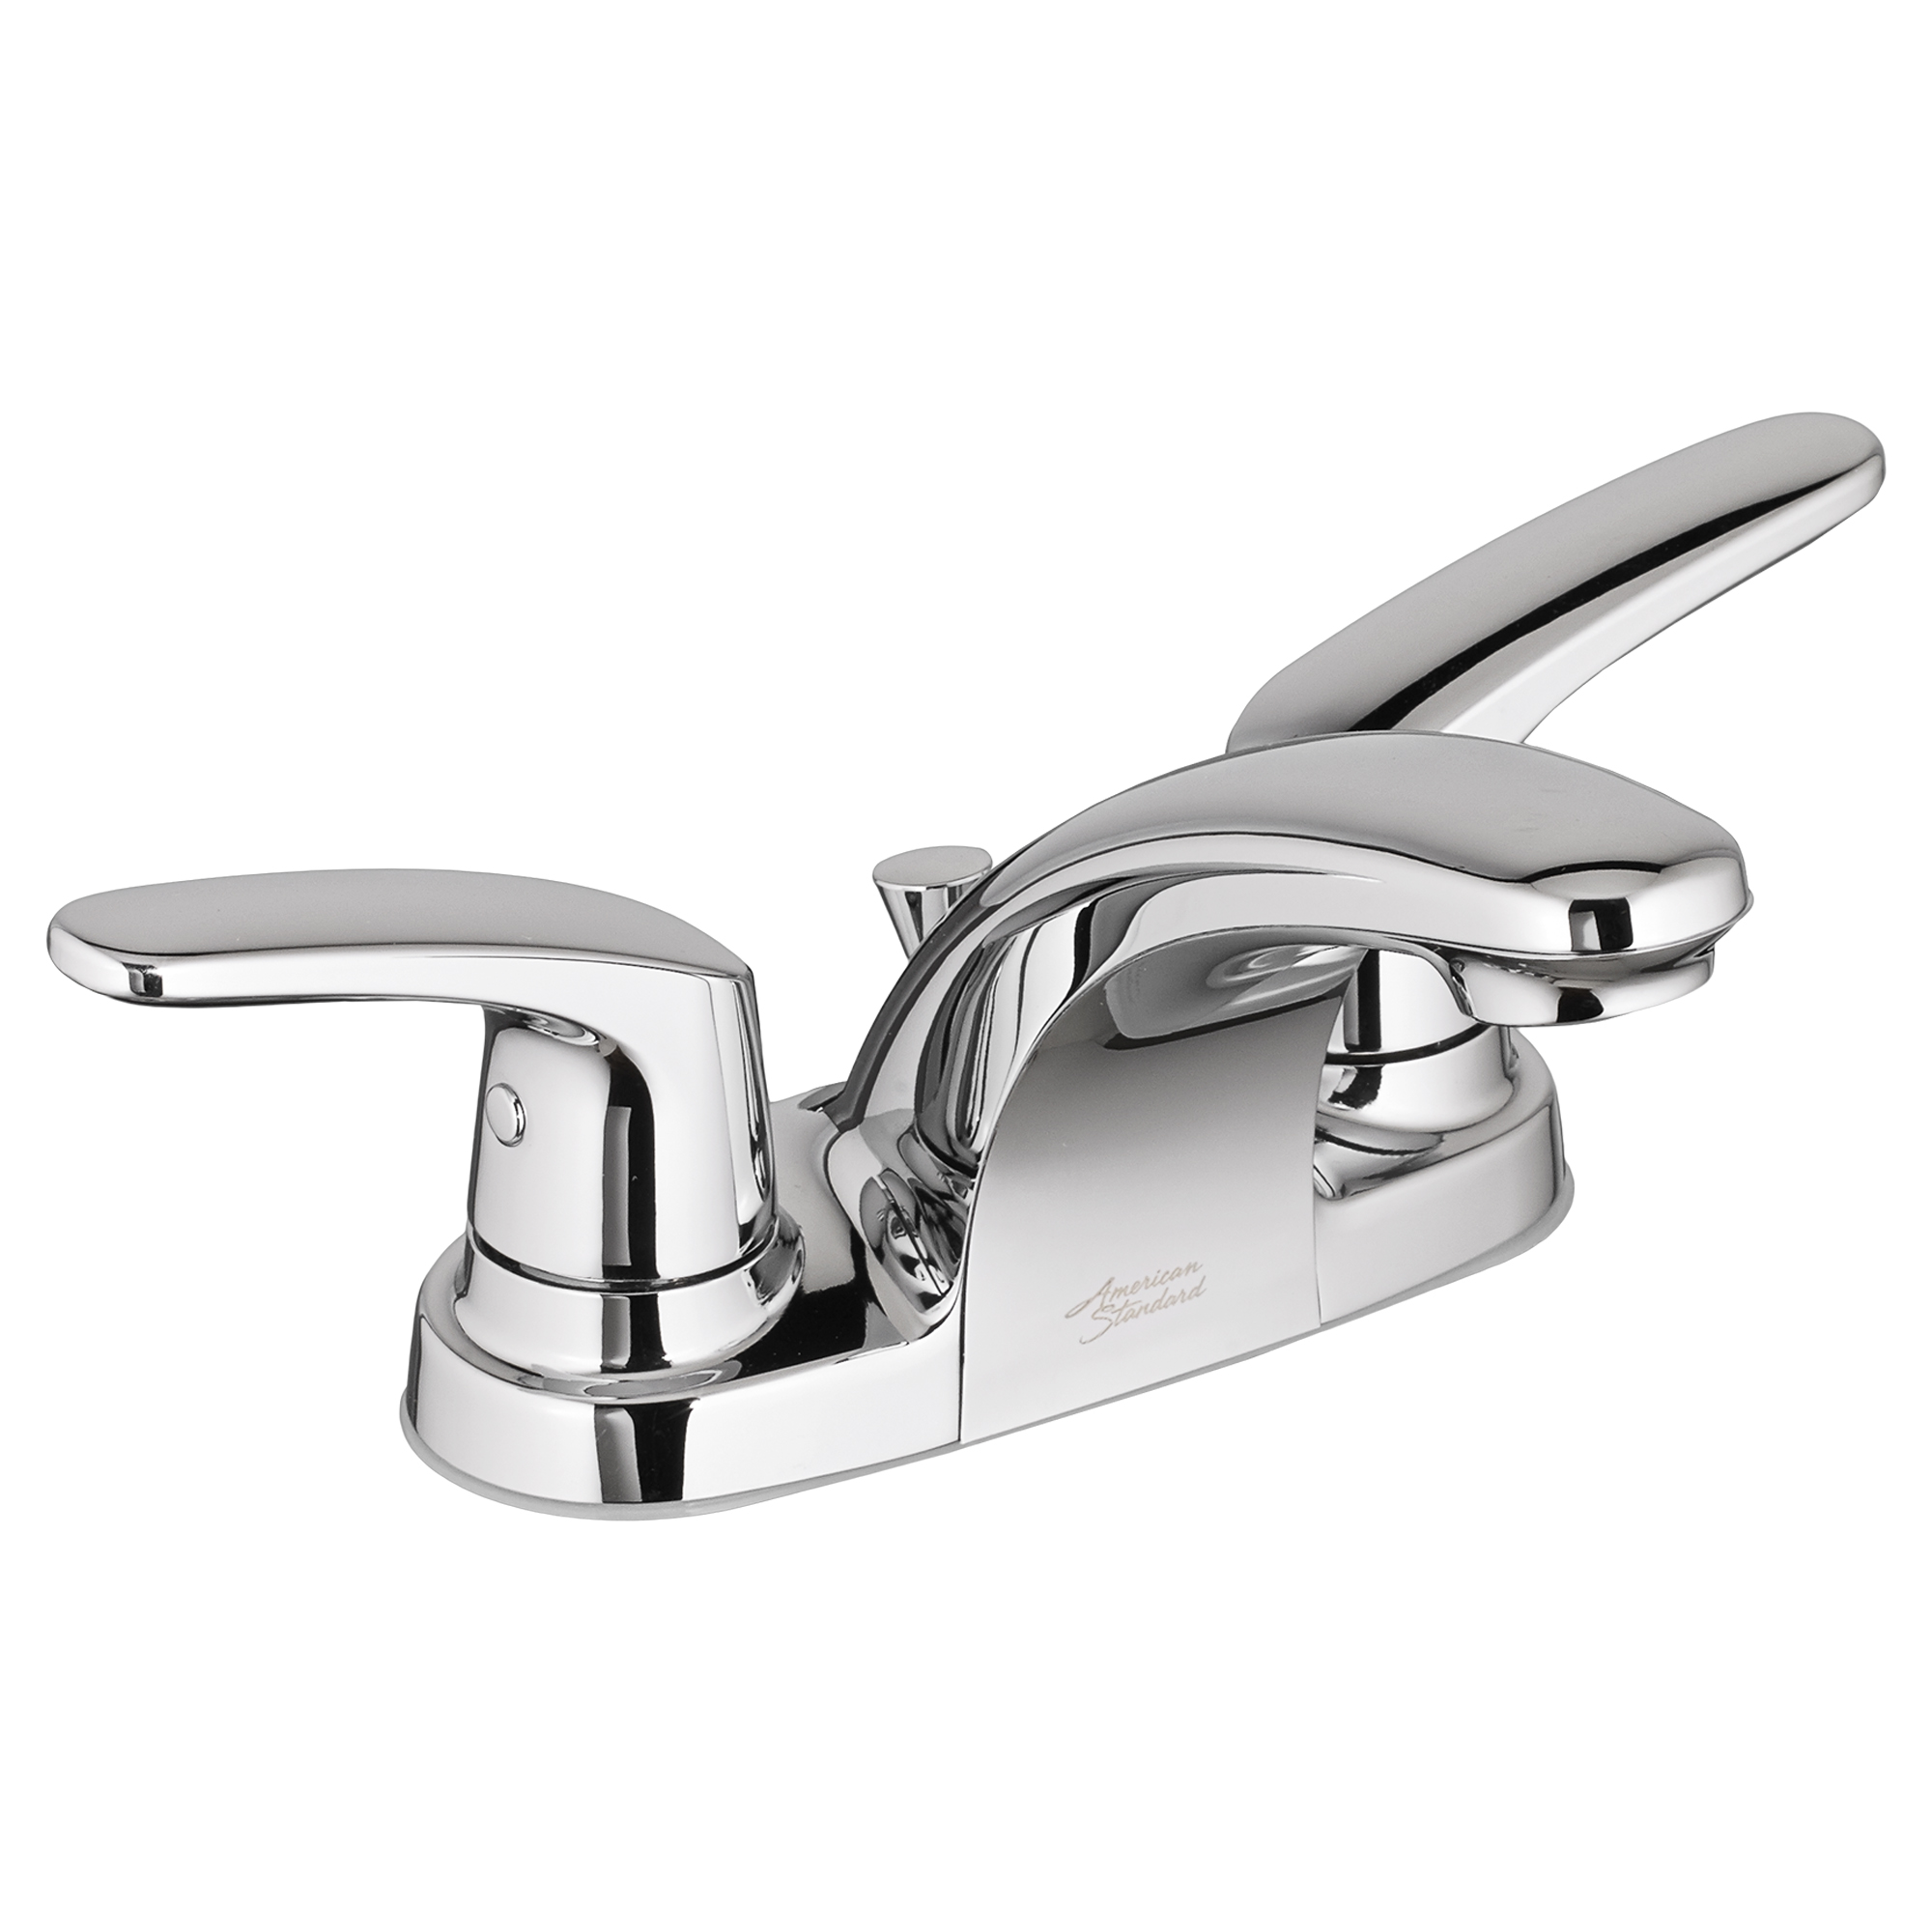 Colony® PRO 4-Inch Centerset 2-Handle Bathroom Faucet 0.5 gpm/1.9 Lpm With Lever Handles